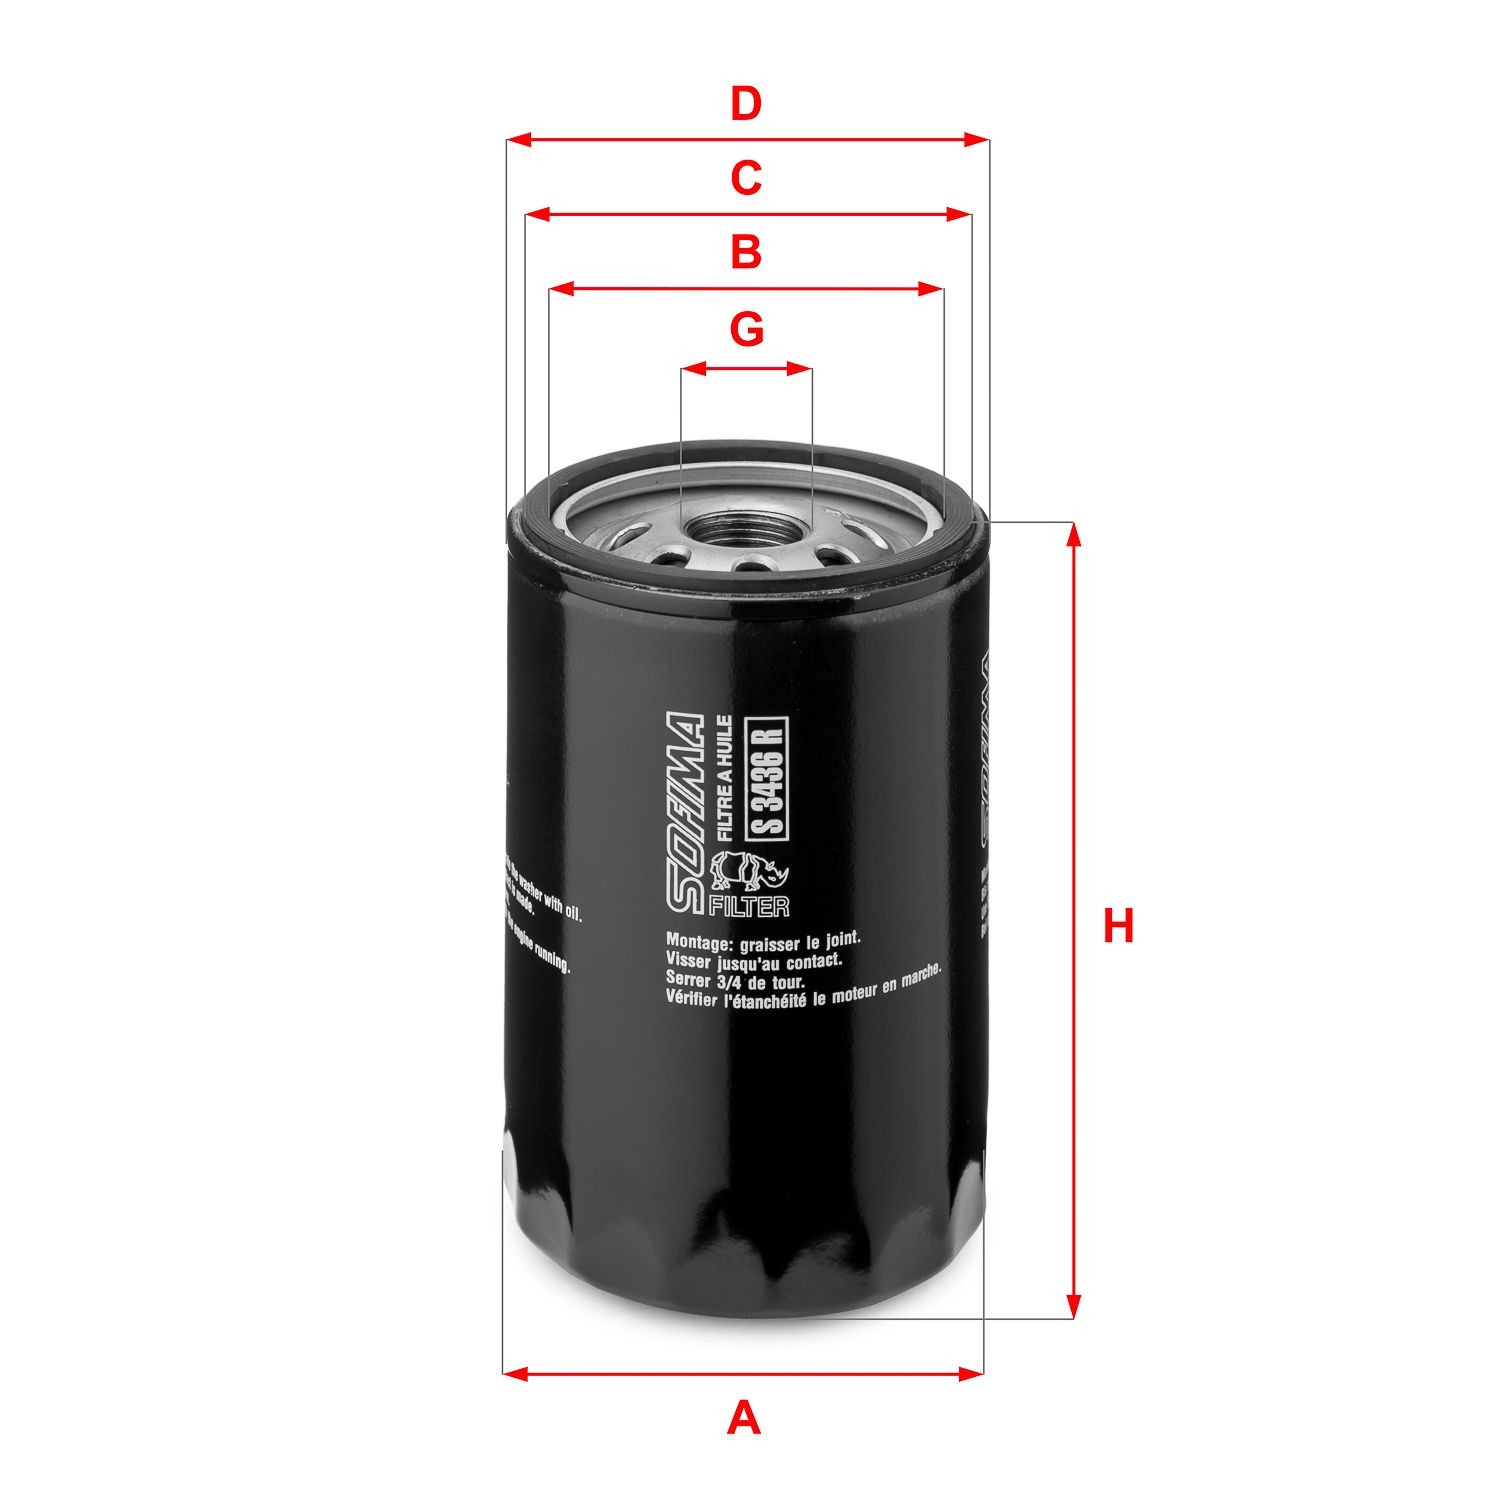 SOFIMA S 3436 R Oil filter 3/4-16 UNF, with one anti-return valve, Spin-on Filter